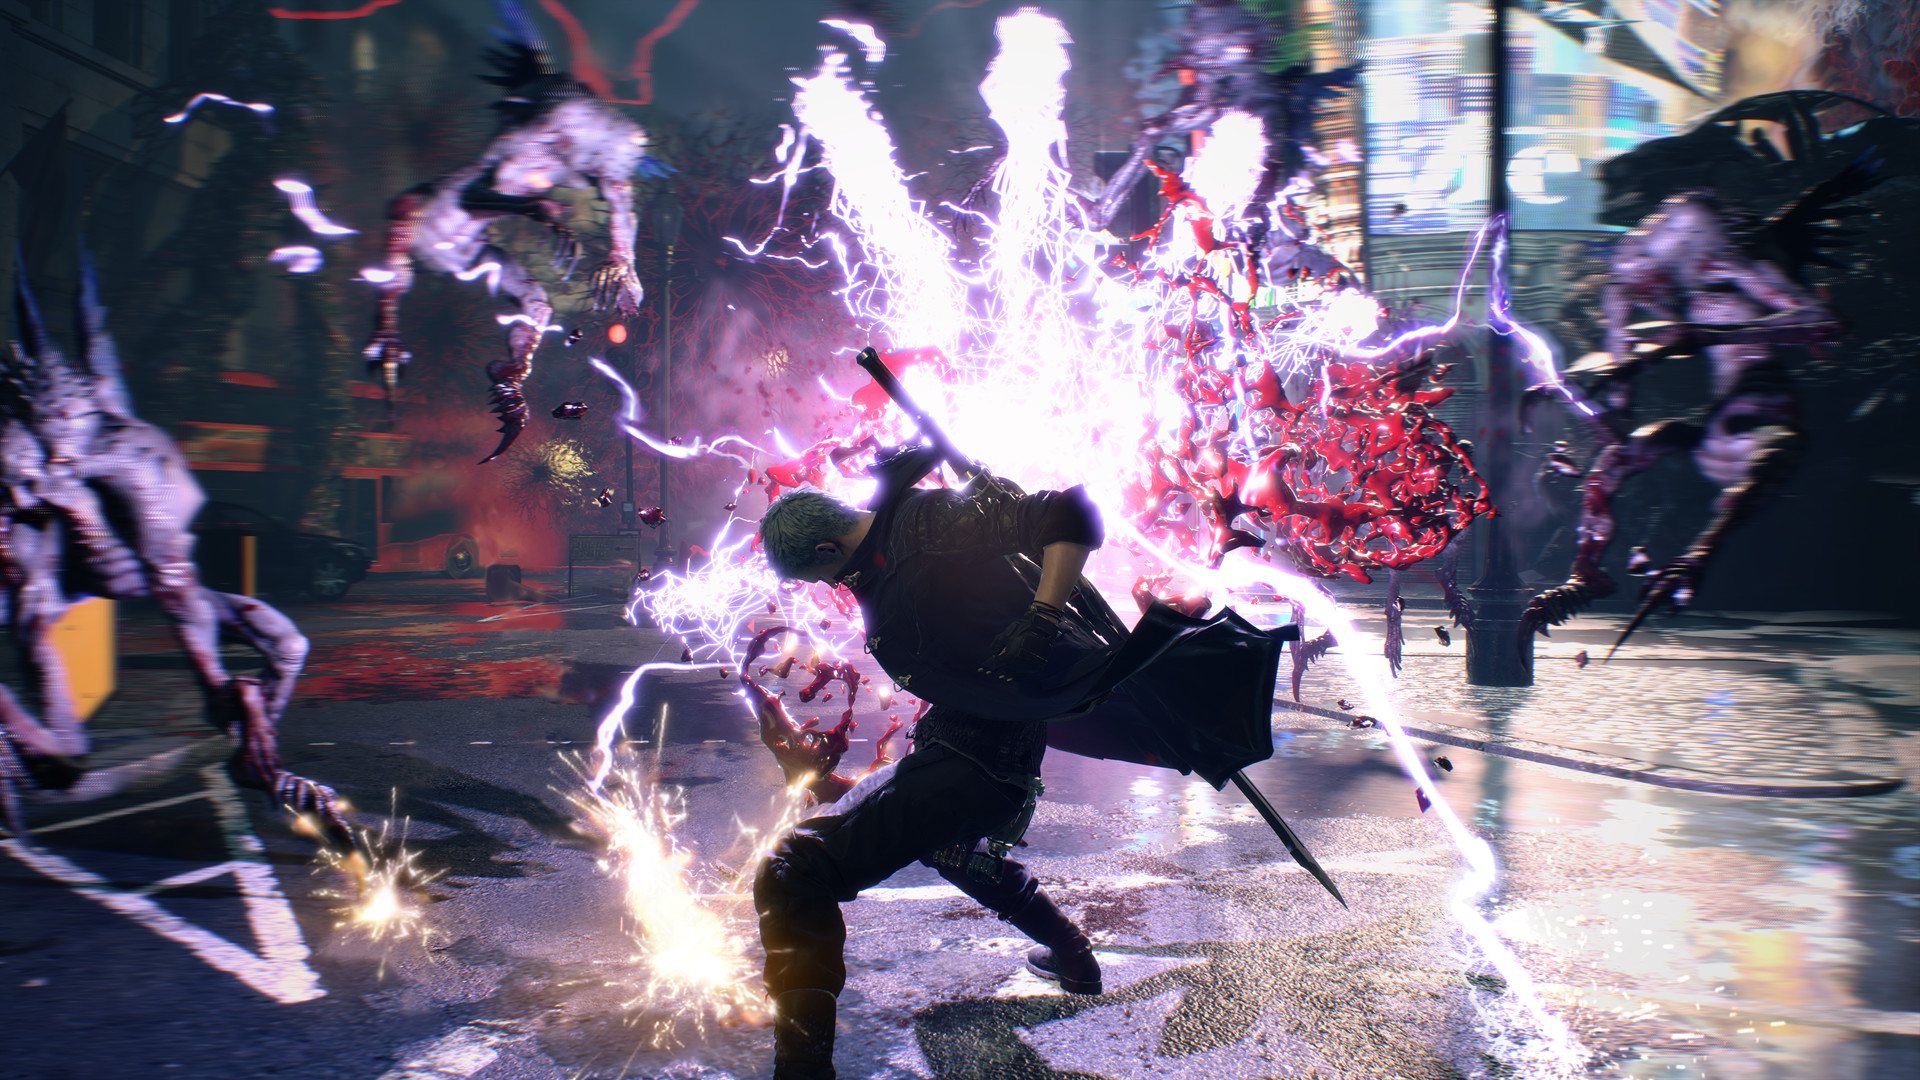 Devil May Cry 5 - Deluxe Upgrade Steam CD Key 13.75 usd